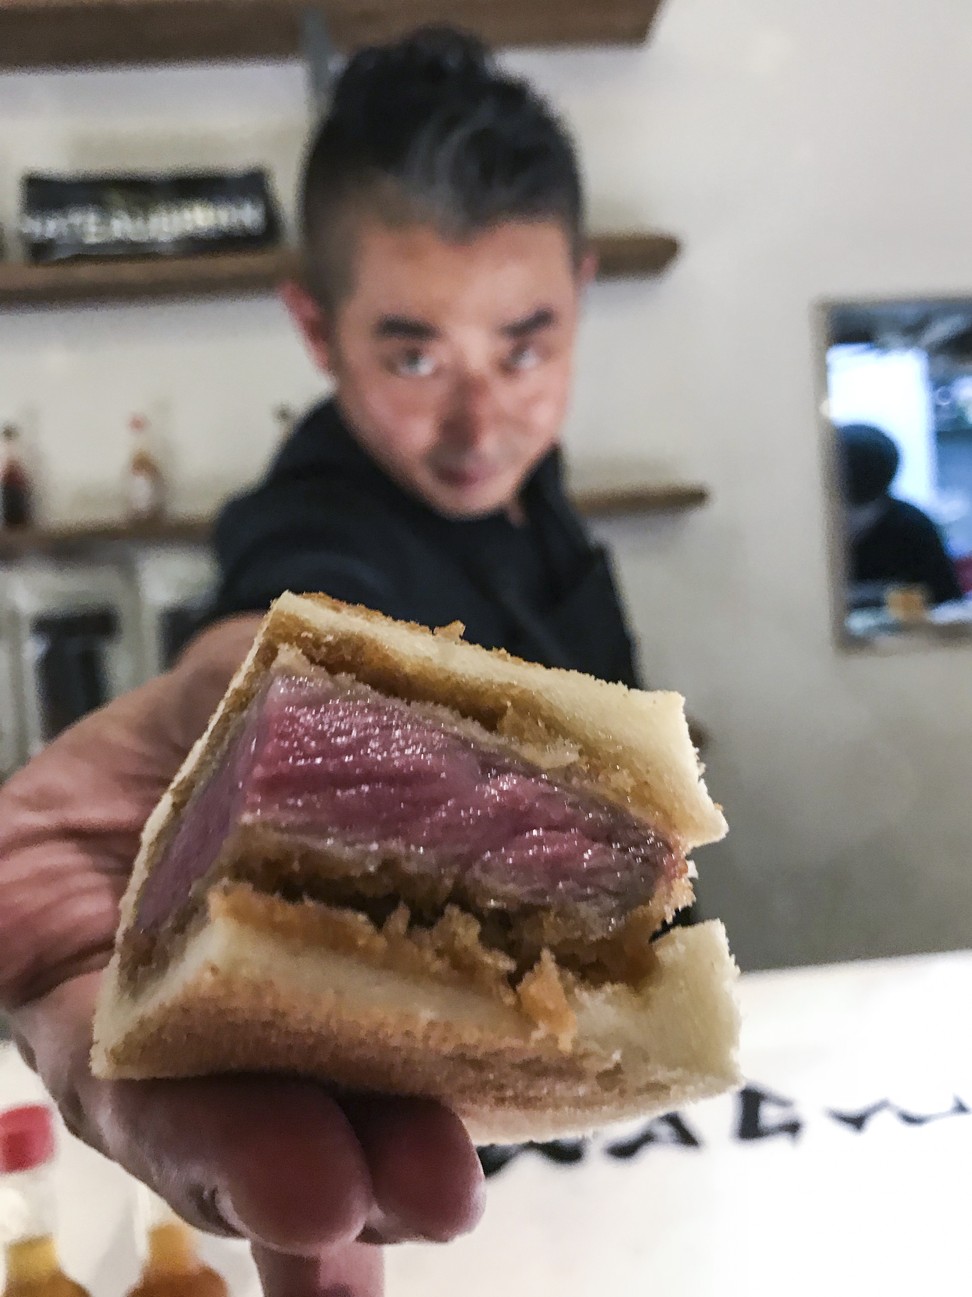 Chef Hisato Hamada hands out quarters of his wagyu beef cutlet sandwiches at Elephant Grounds in Fashion Walk, Hong Kong. His Tokyo restaurant Wagyumafia will open a branch in the city next month. Photo: Bernice Chan